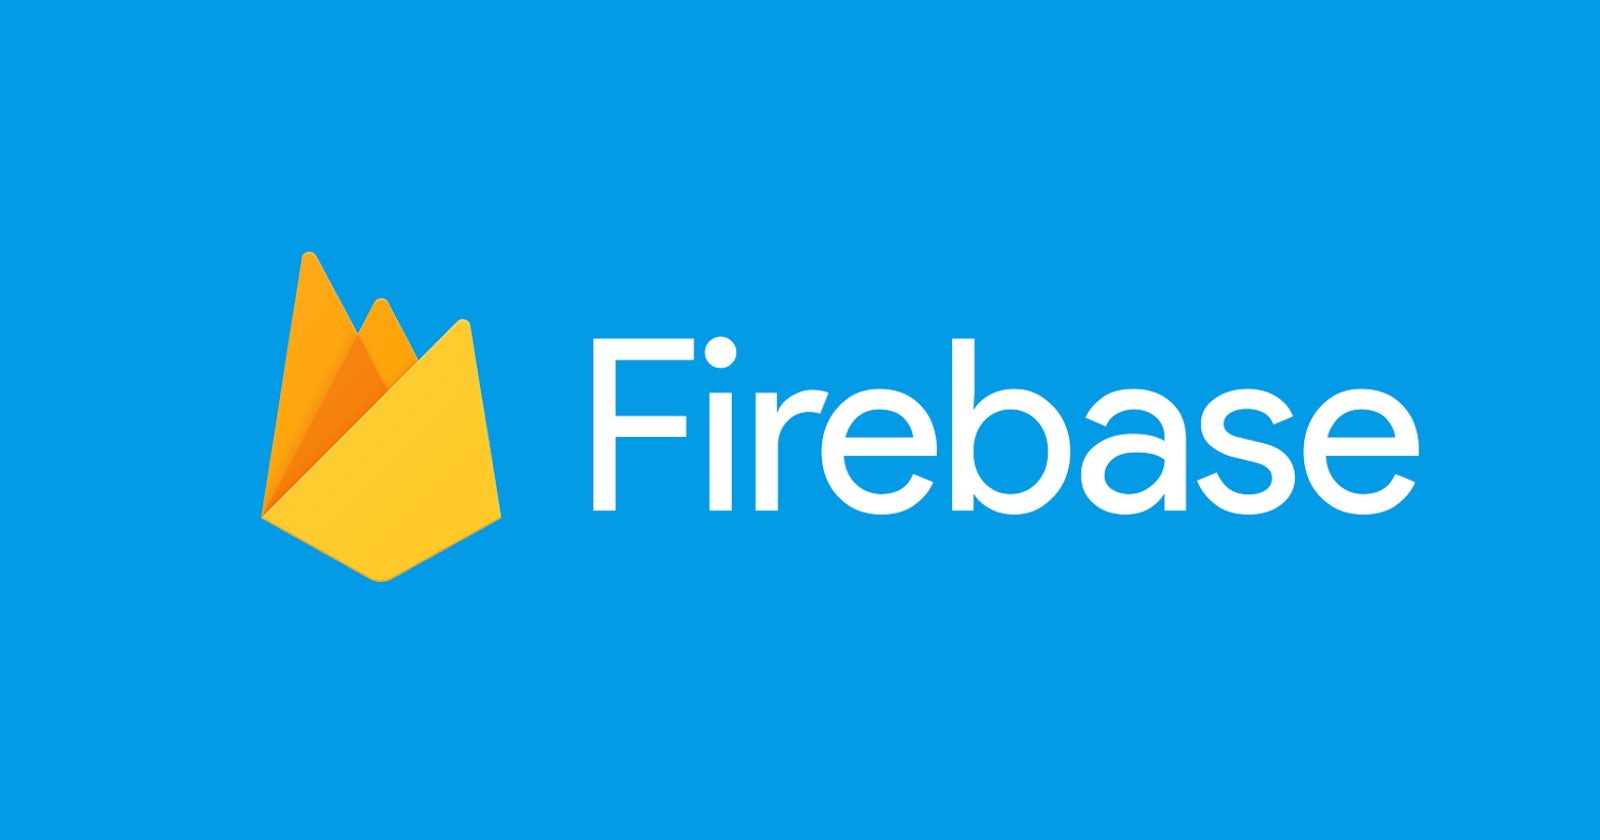 All you need to know about Firebase!🔥